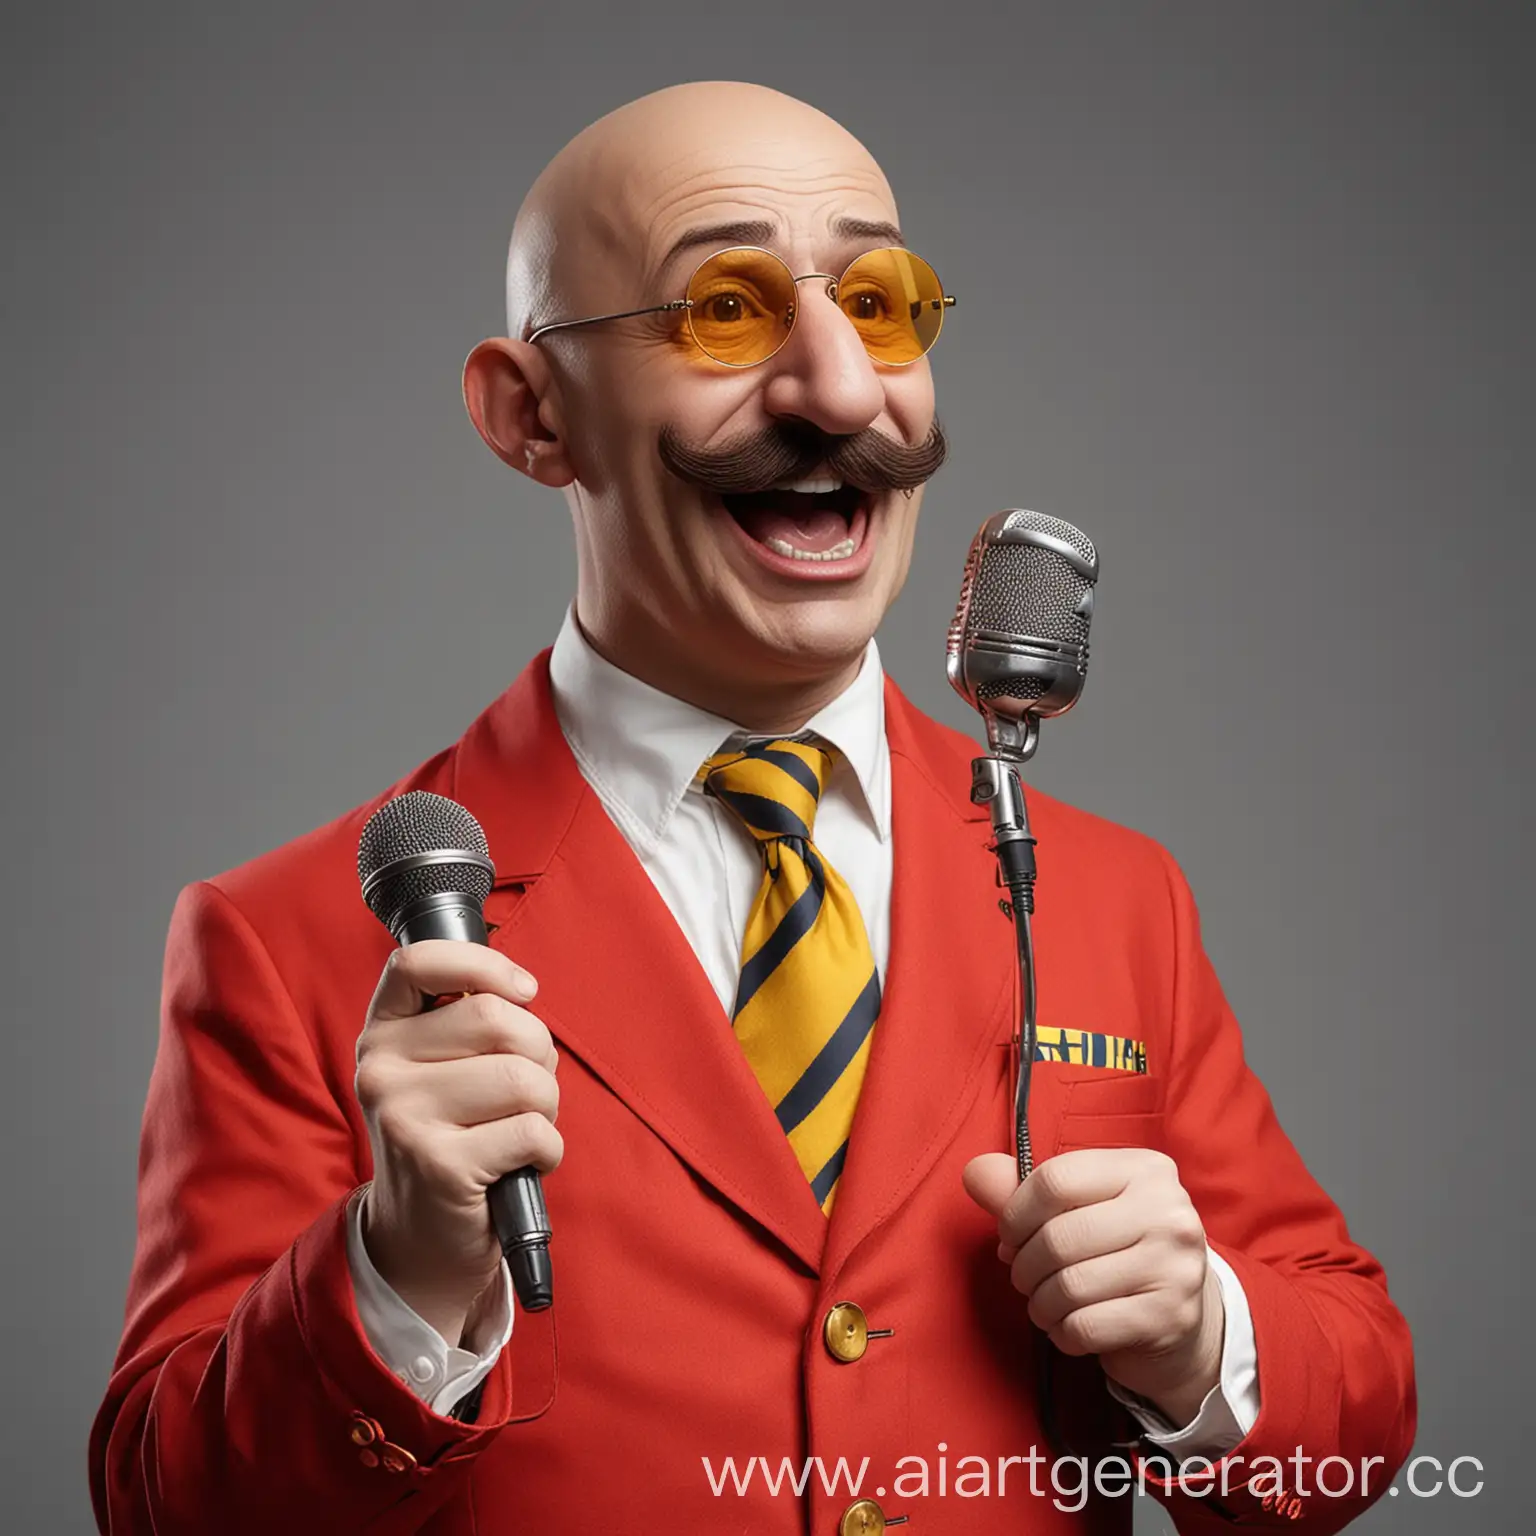 Bald-Doctor-Eggman-Singing-with-Enthusiasm-in-RedYellow-Suit